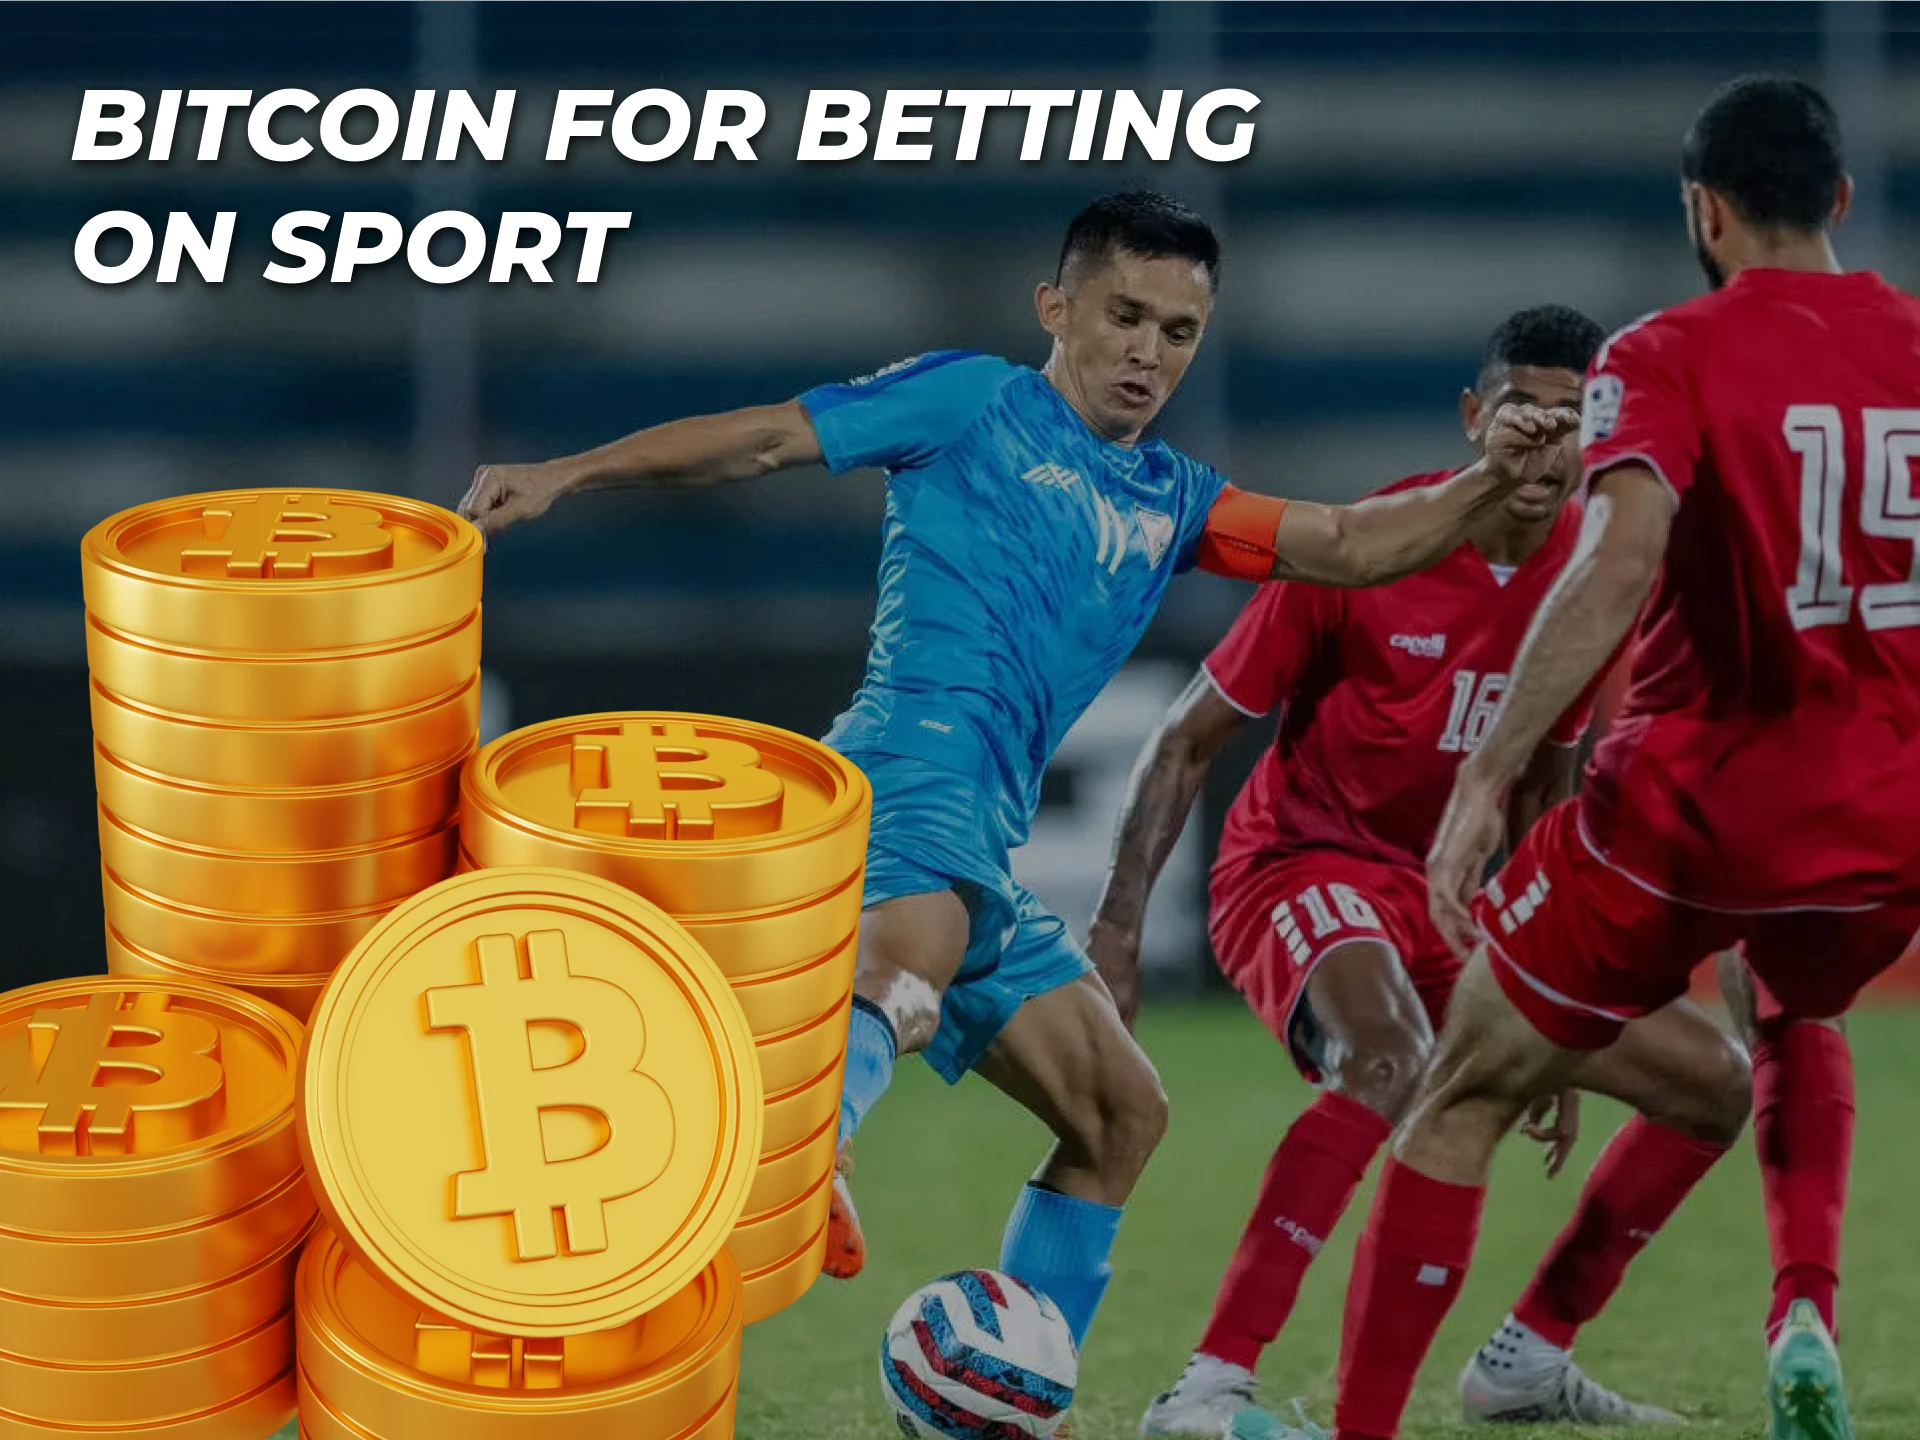 Bitcoin is the most popular cryptocurrency for sports betting.